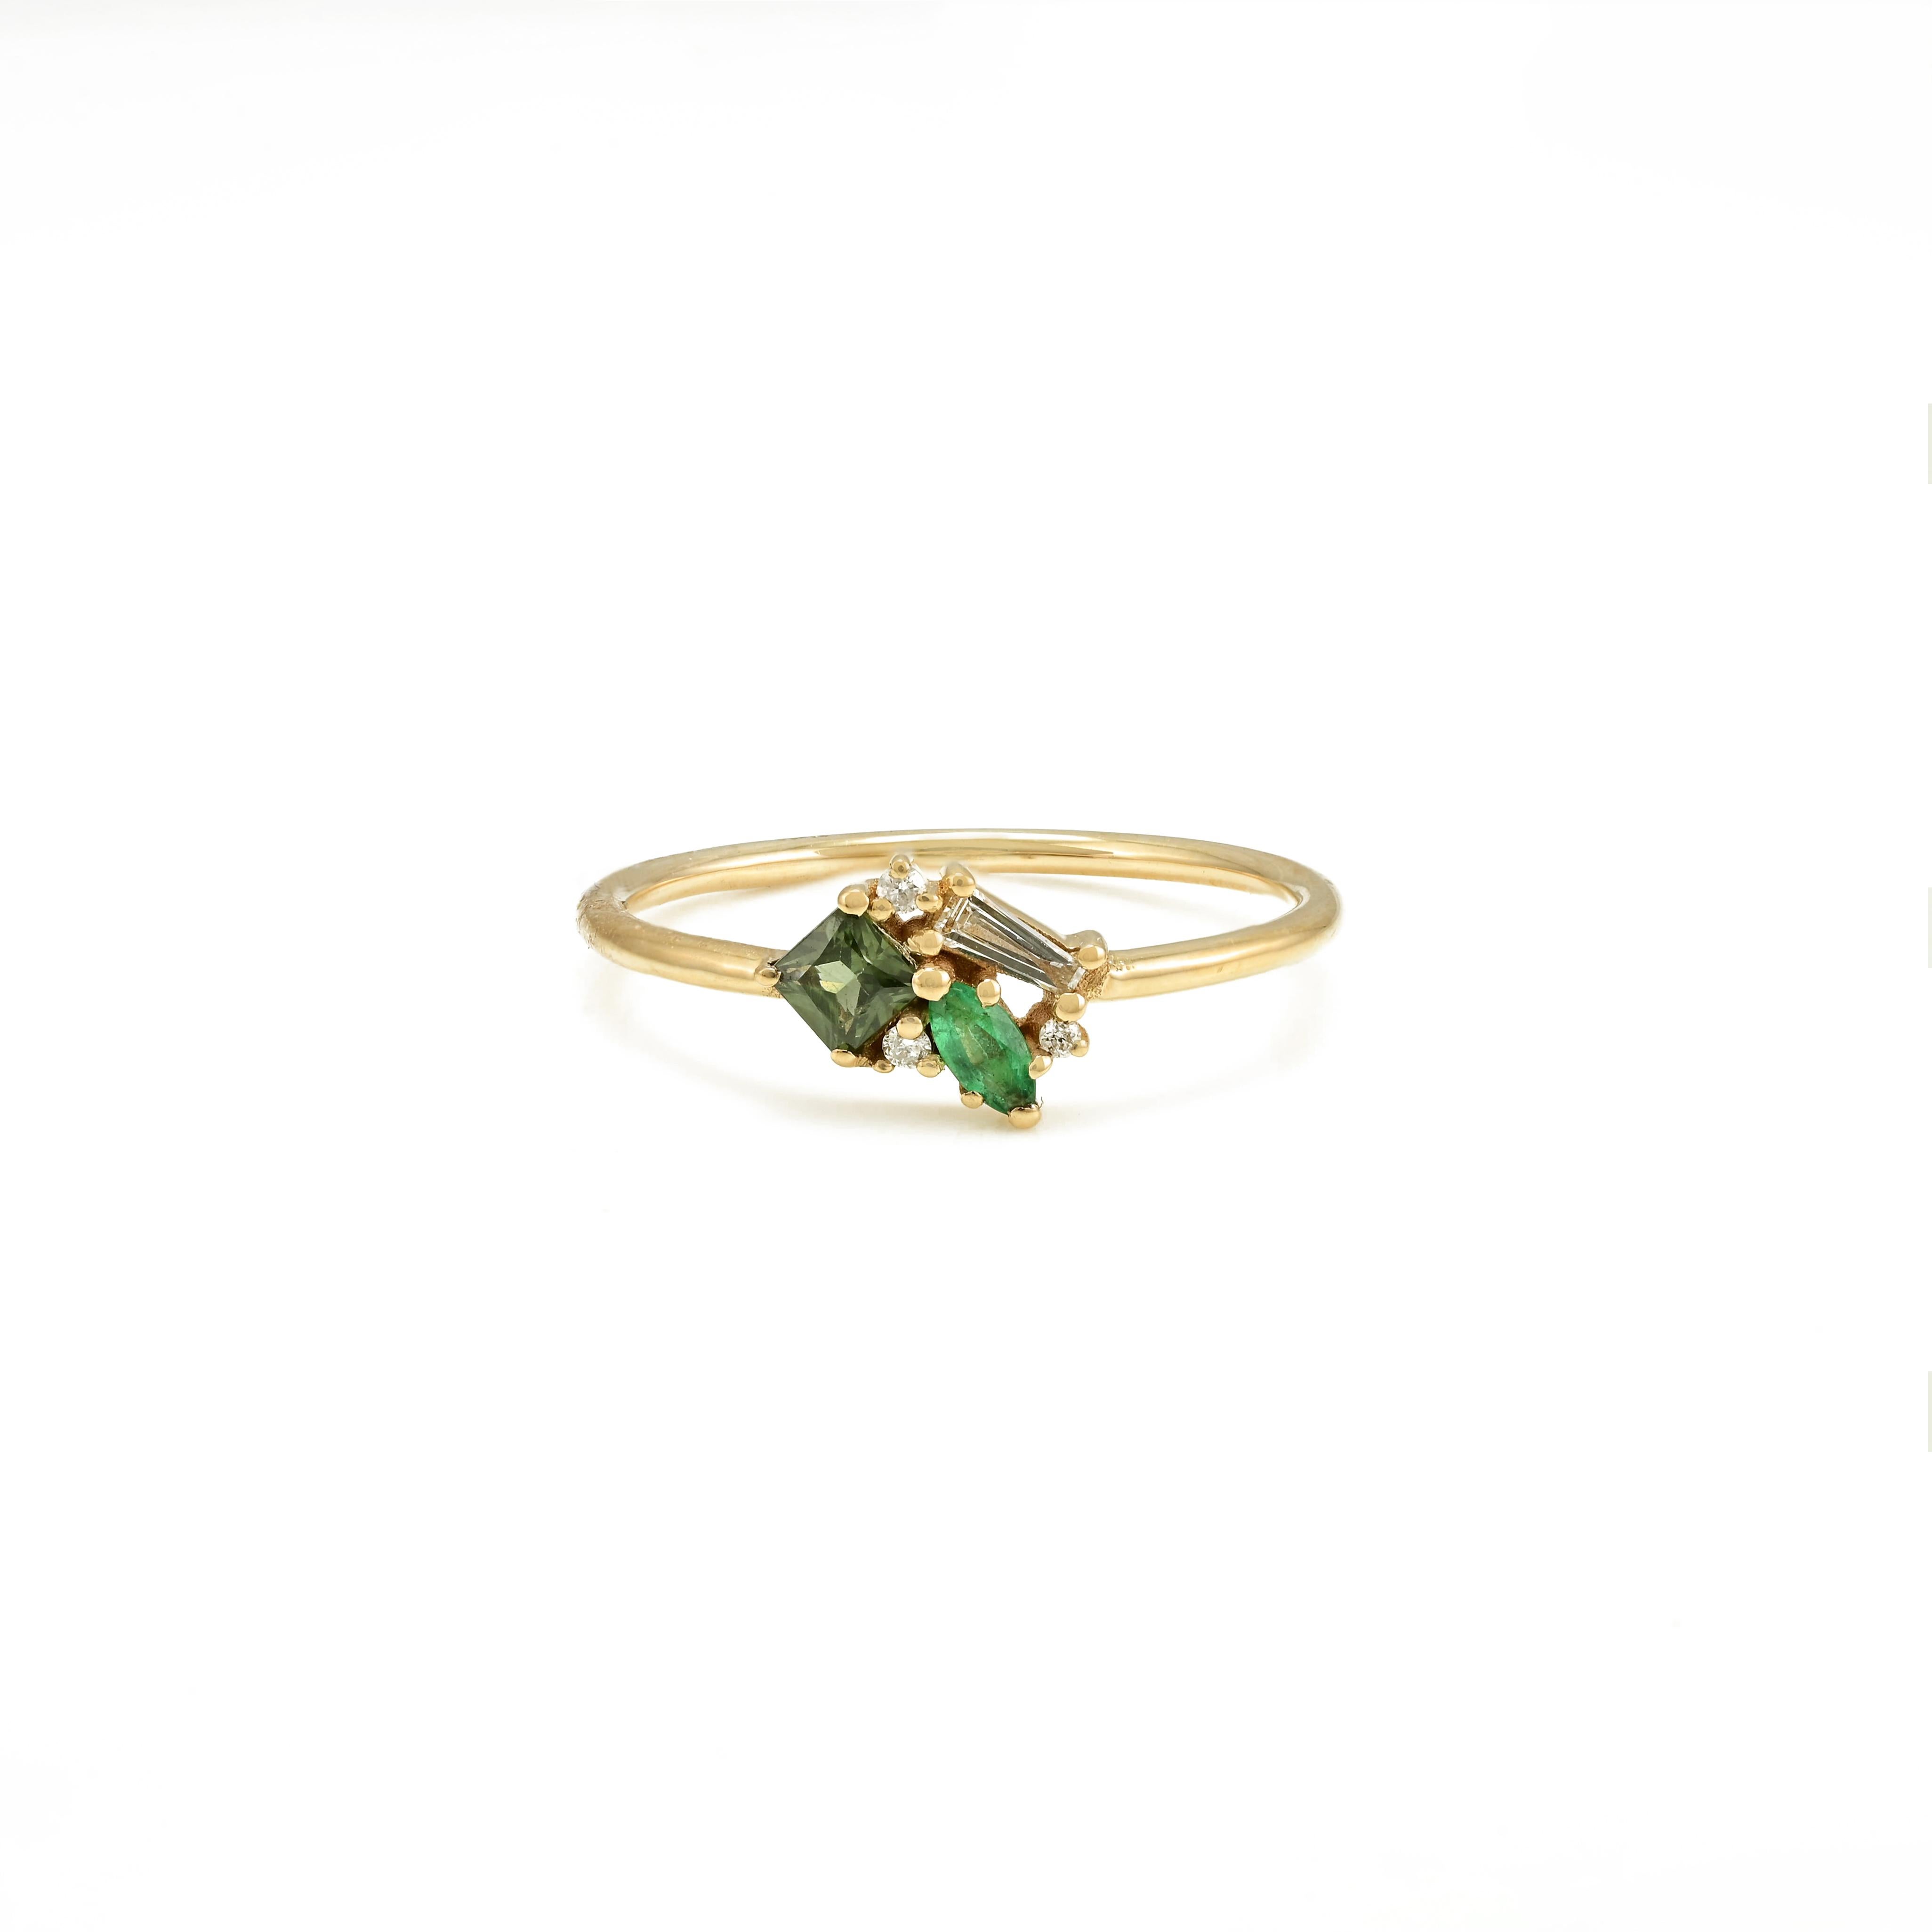 For Sale:  Minimalist Multi Color Gemstone Cluster Ring in 18k Solid Yellow Gold 5